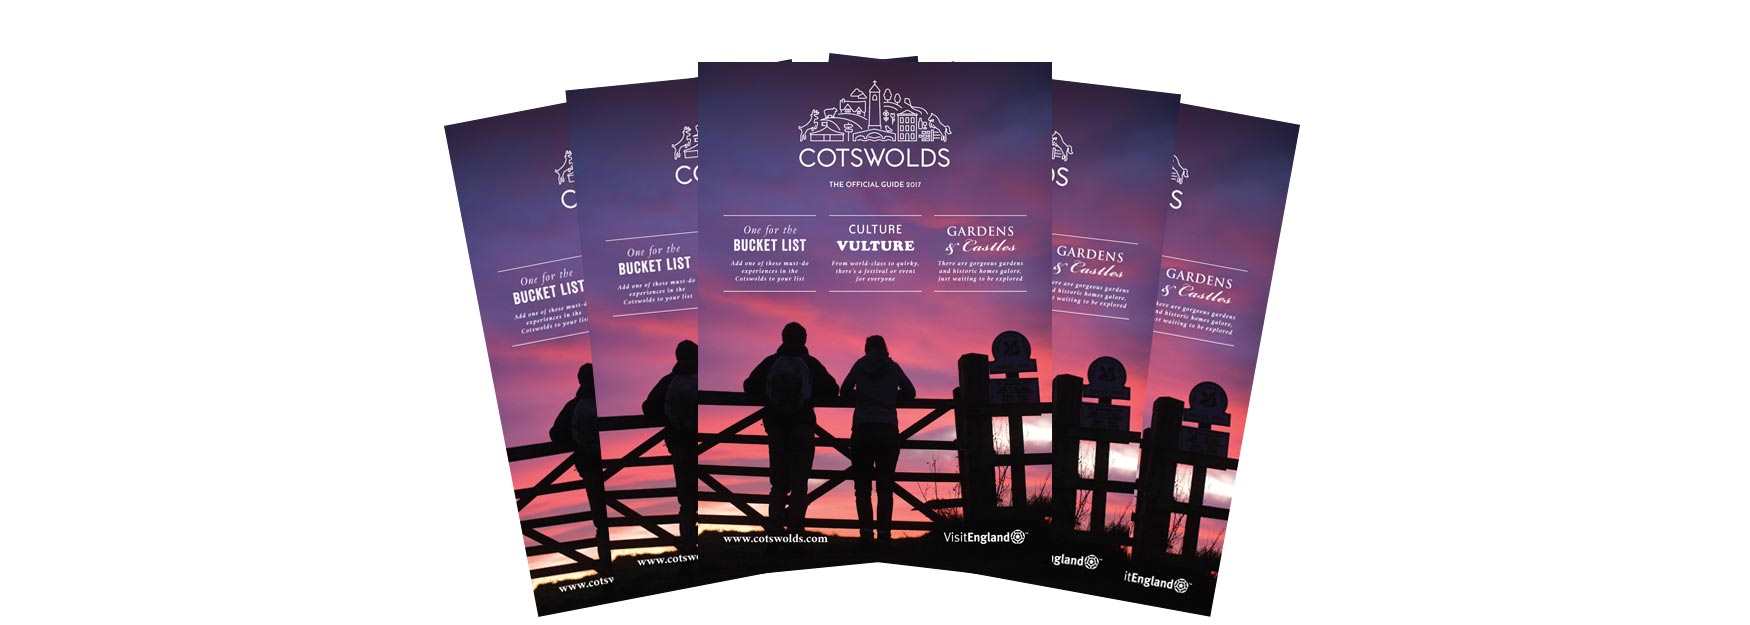 Advertise in the Cotswolds Visitor Guide